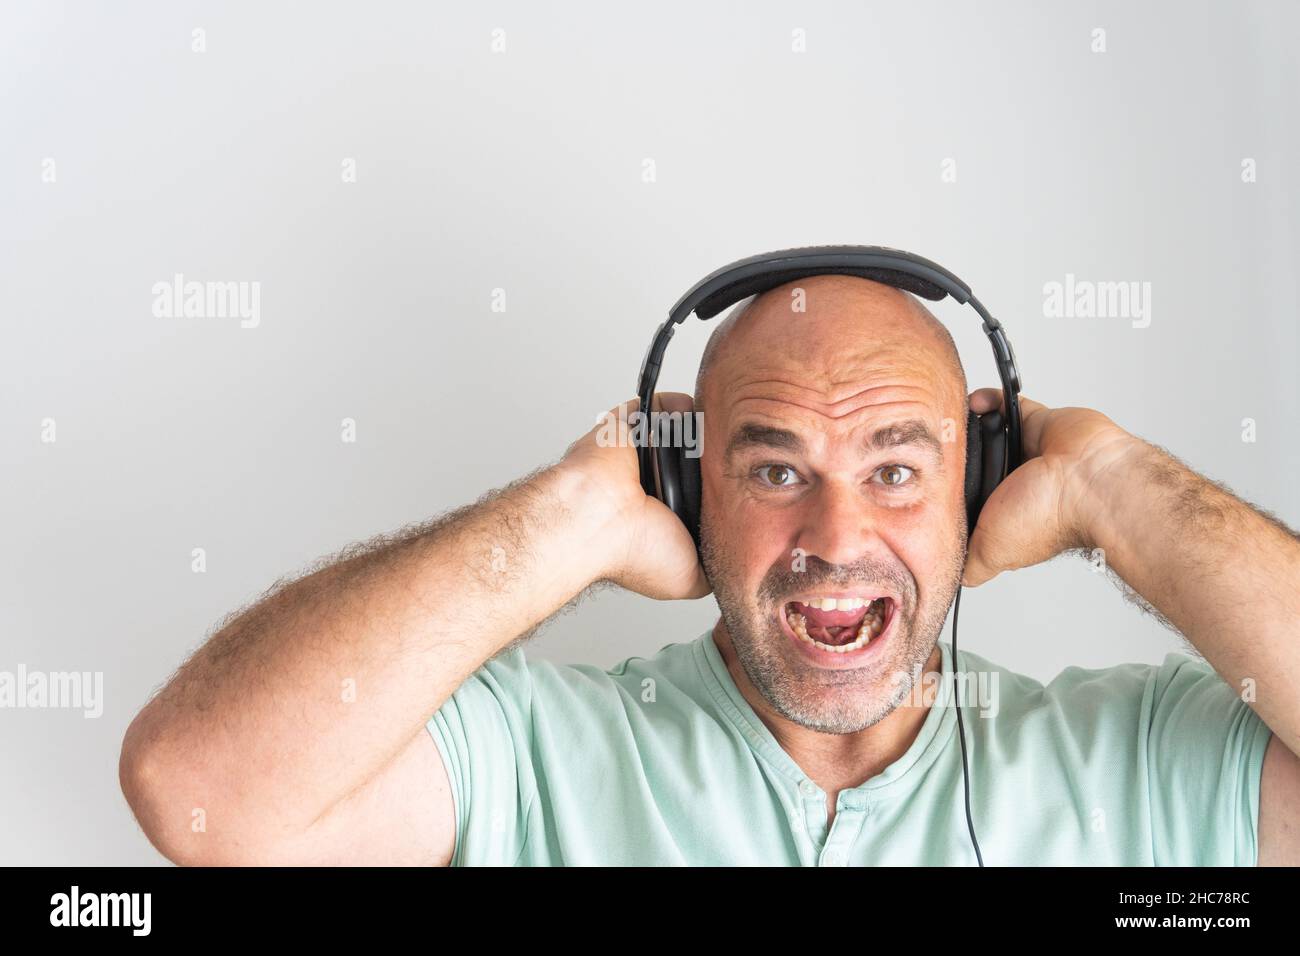 Close-up shot of a face of a bald and bearded Caucasian man, wearing headphones Stock Photo